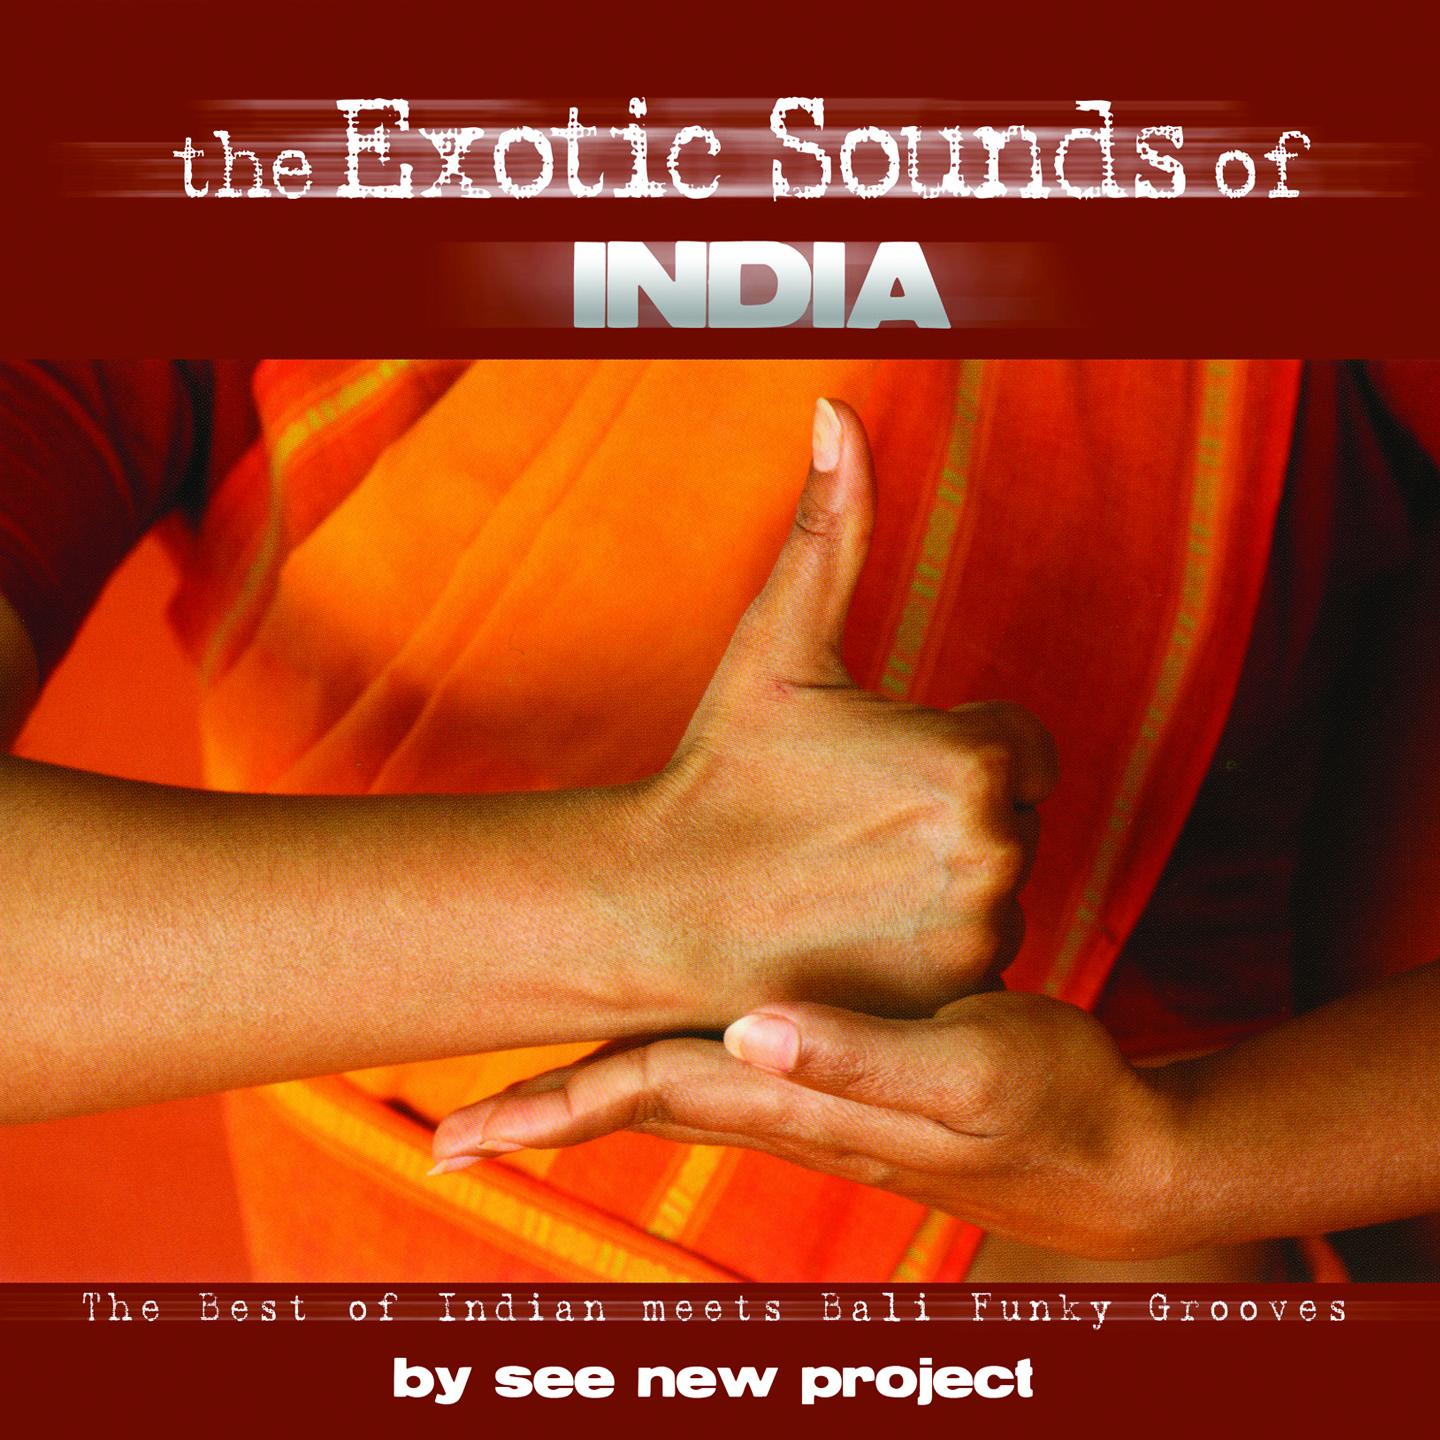 The Exotic Sounds of India